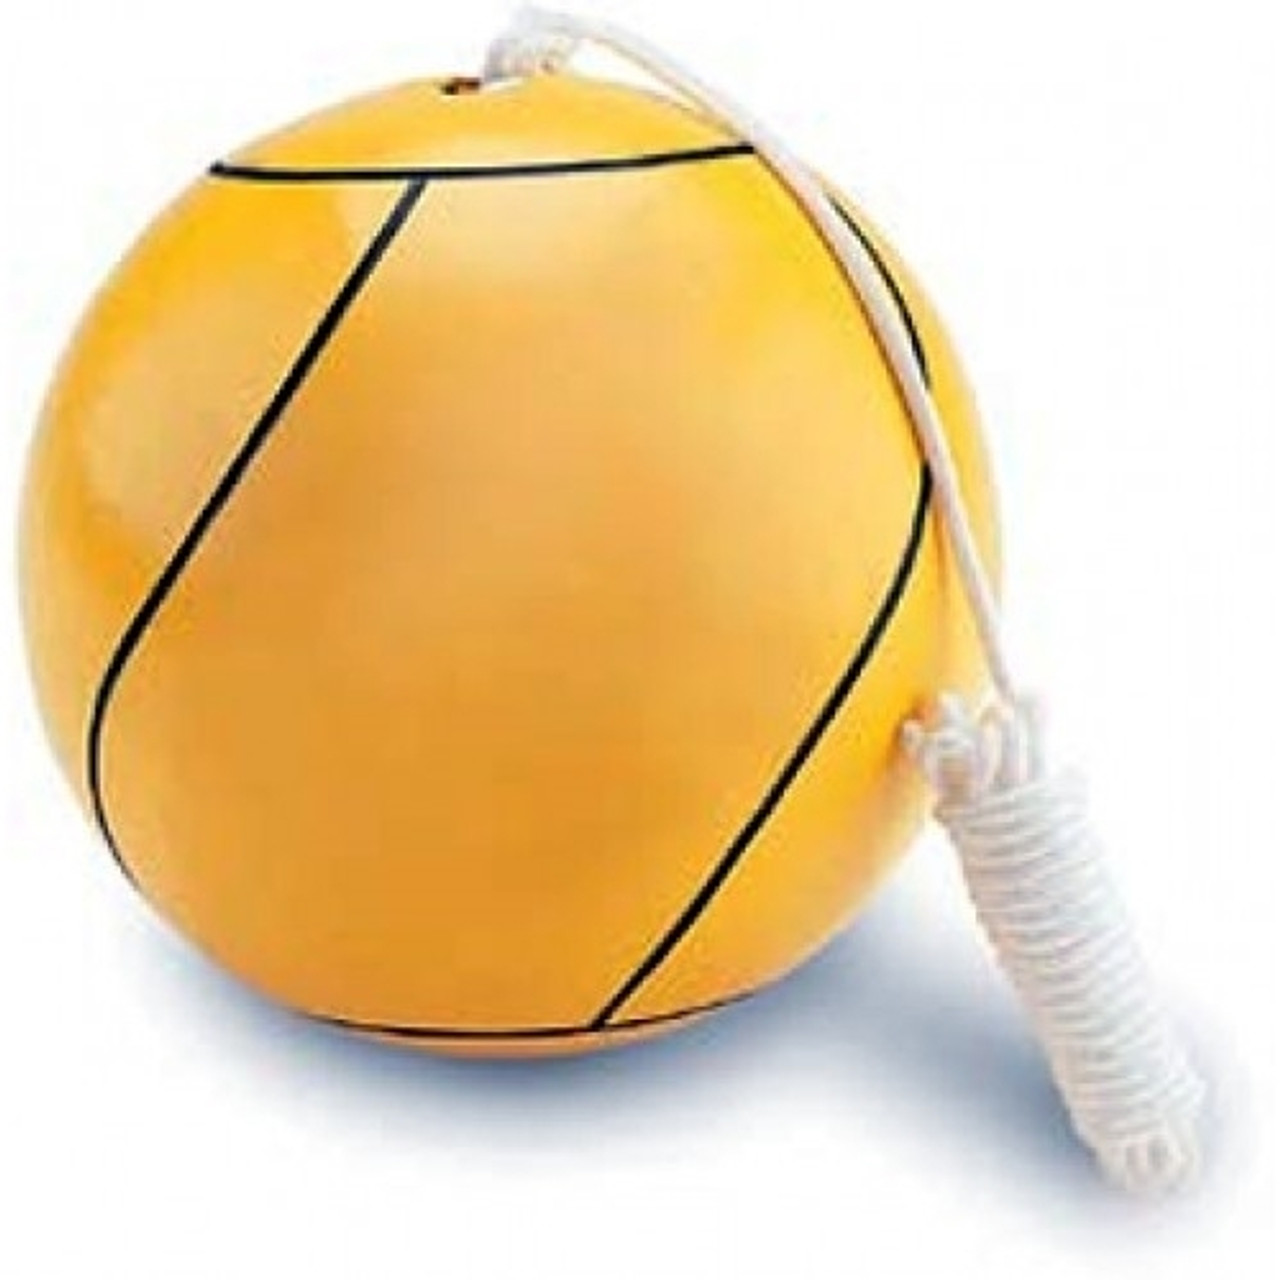 Download TB50-B Replacement Tetherball Yellow Inc Bison Sports ...